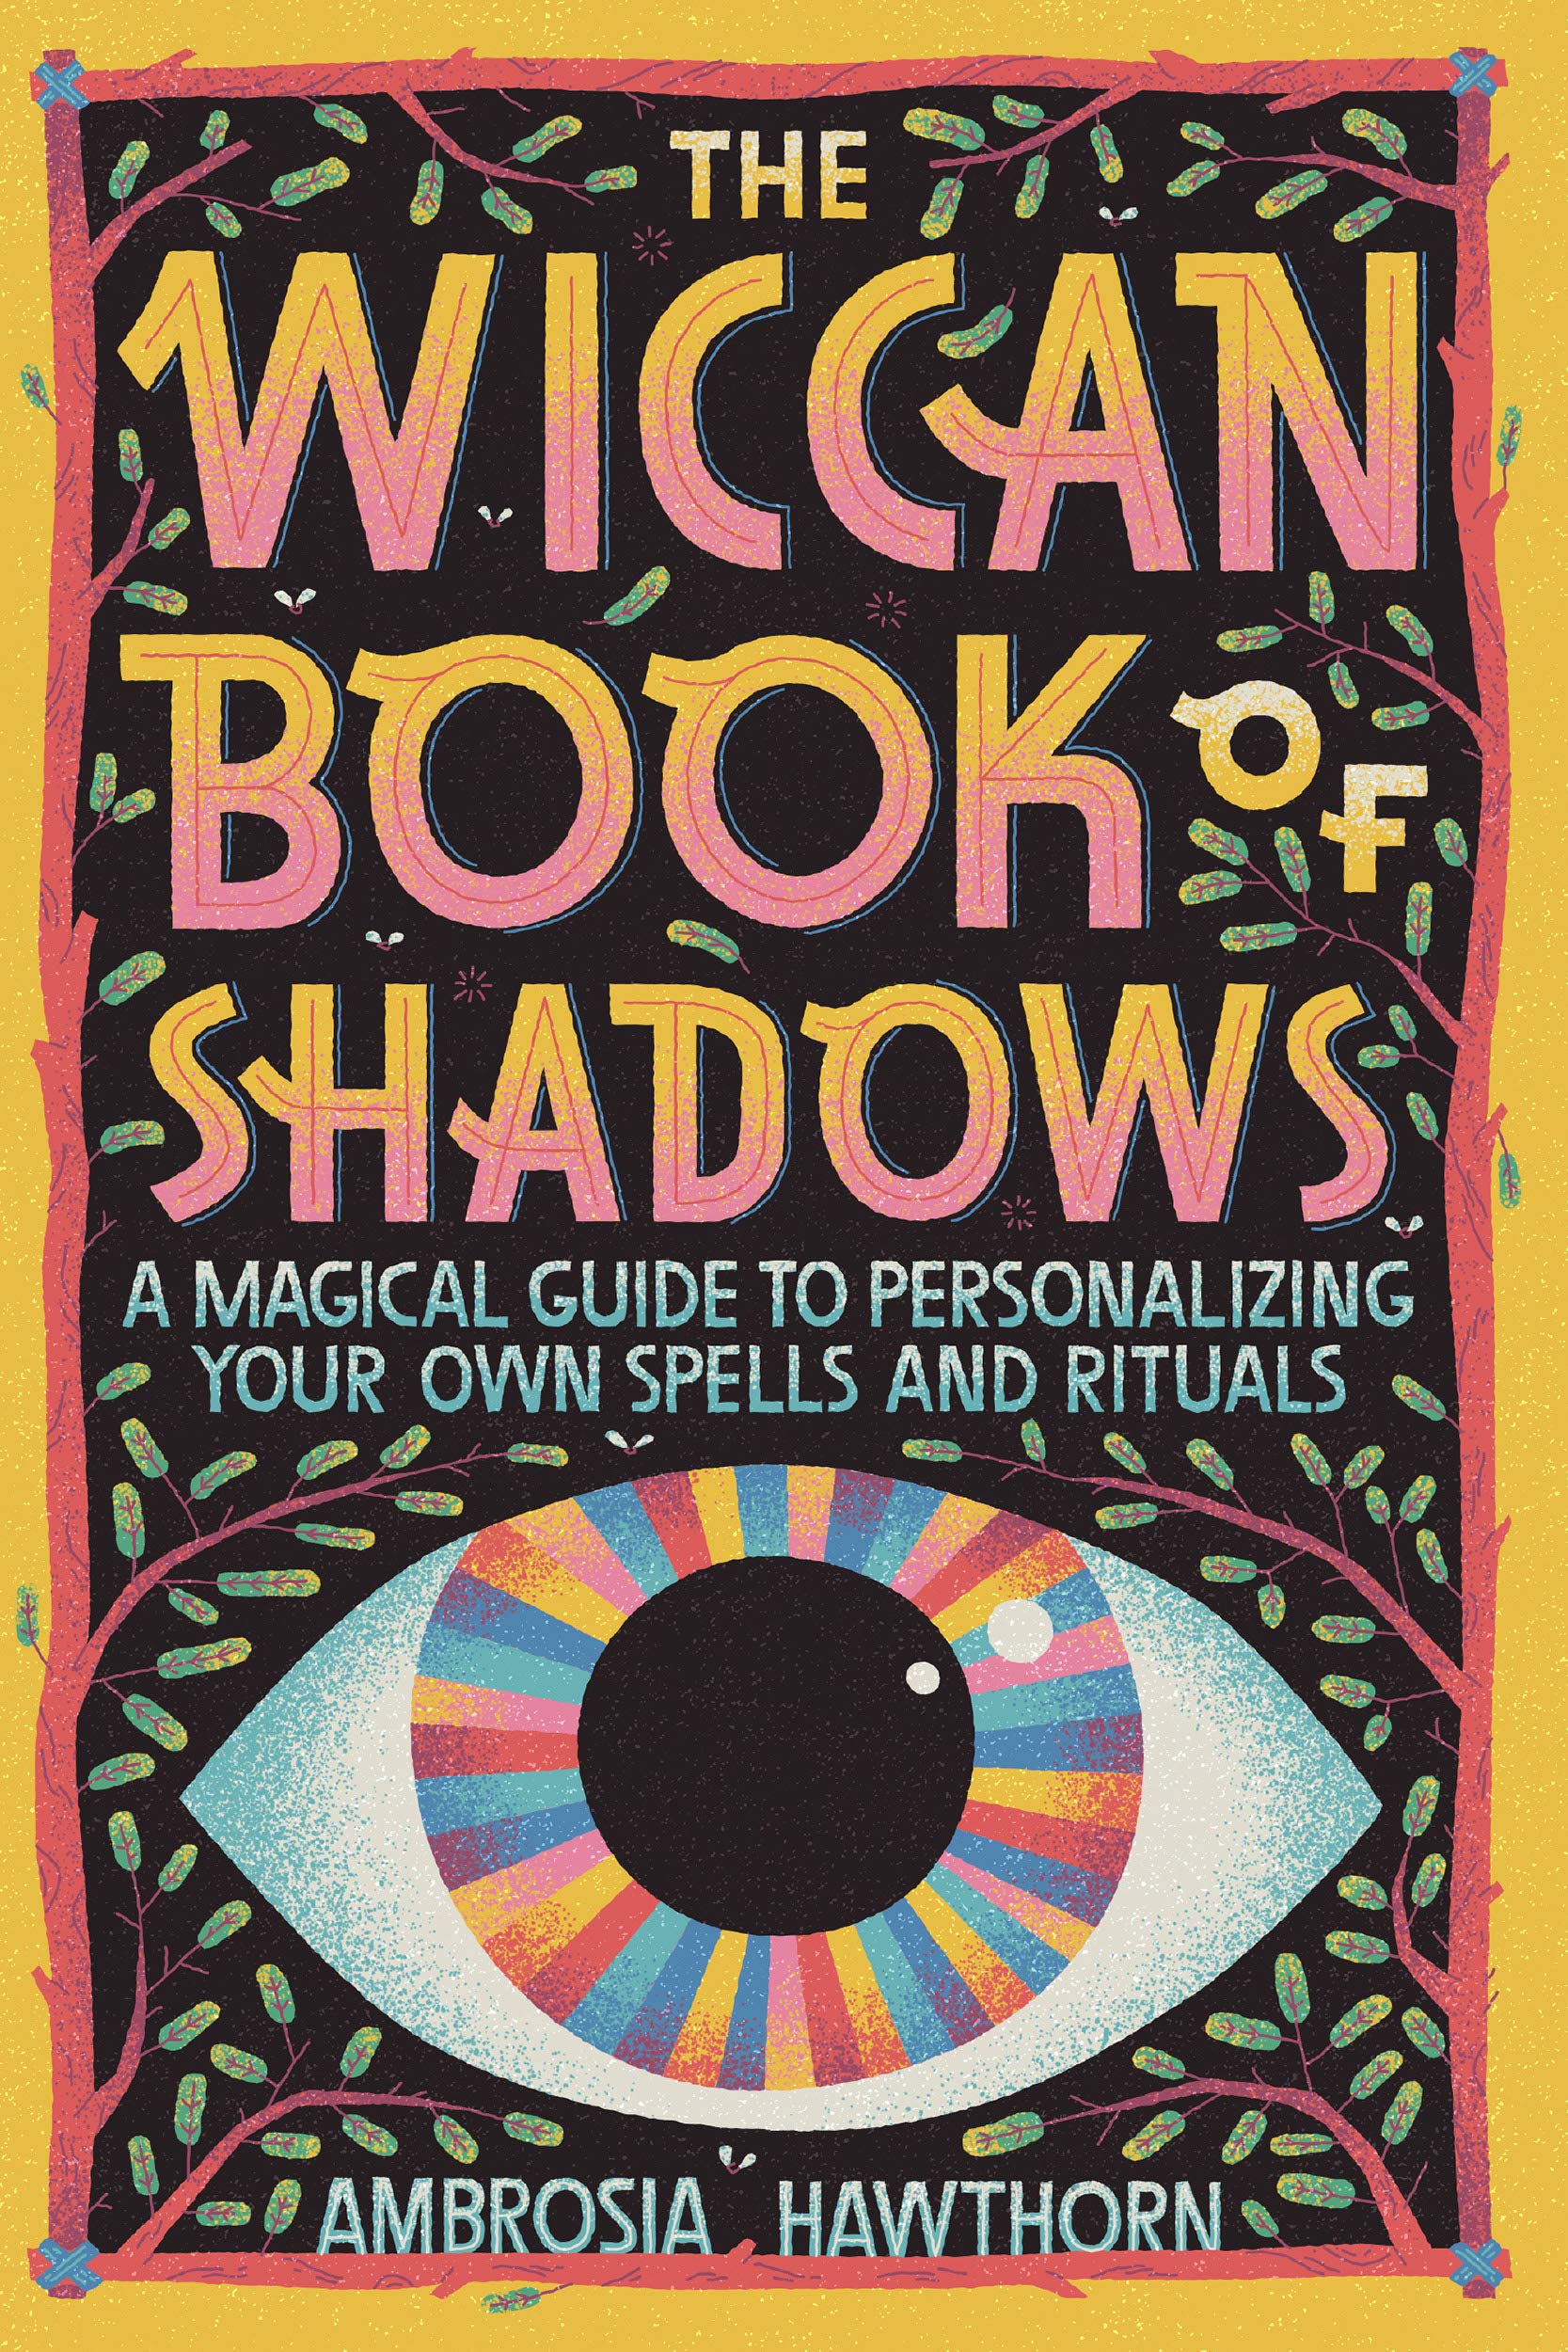 The Wiccan Book of Shadows: by Ambrosia Hawthorn